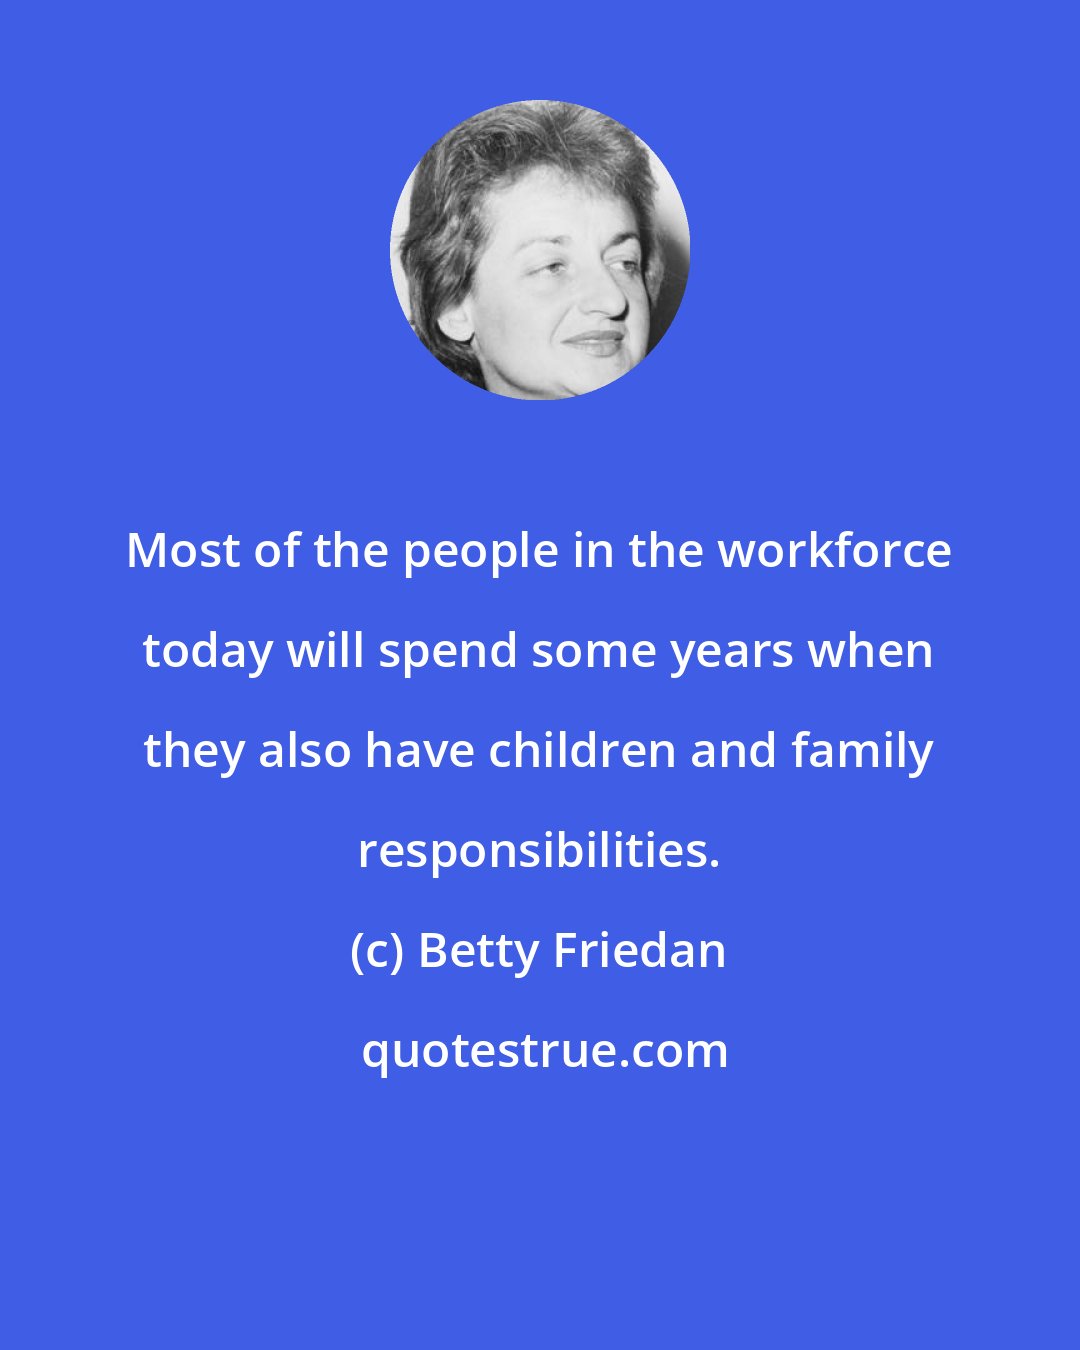 Betty Friedan: Most of the people in the workforce today will spend some years when they also have children and family responsibilities.